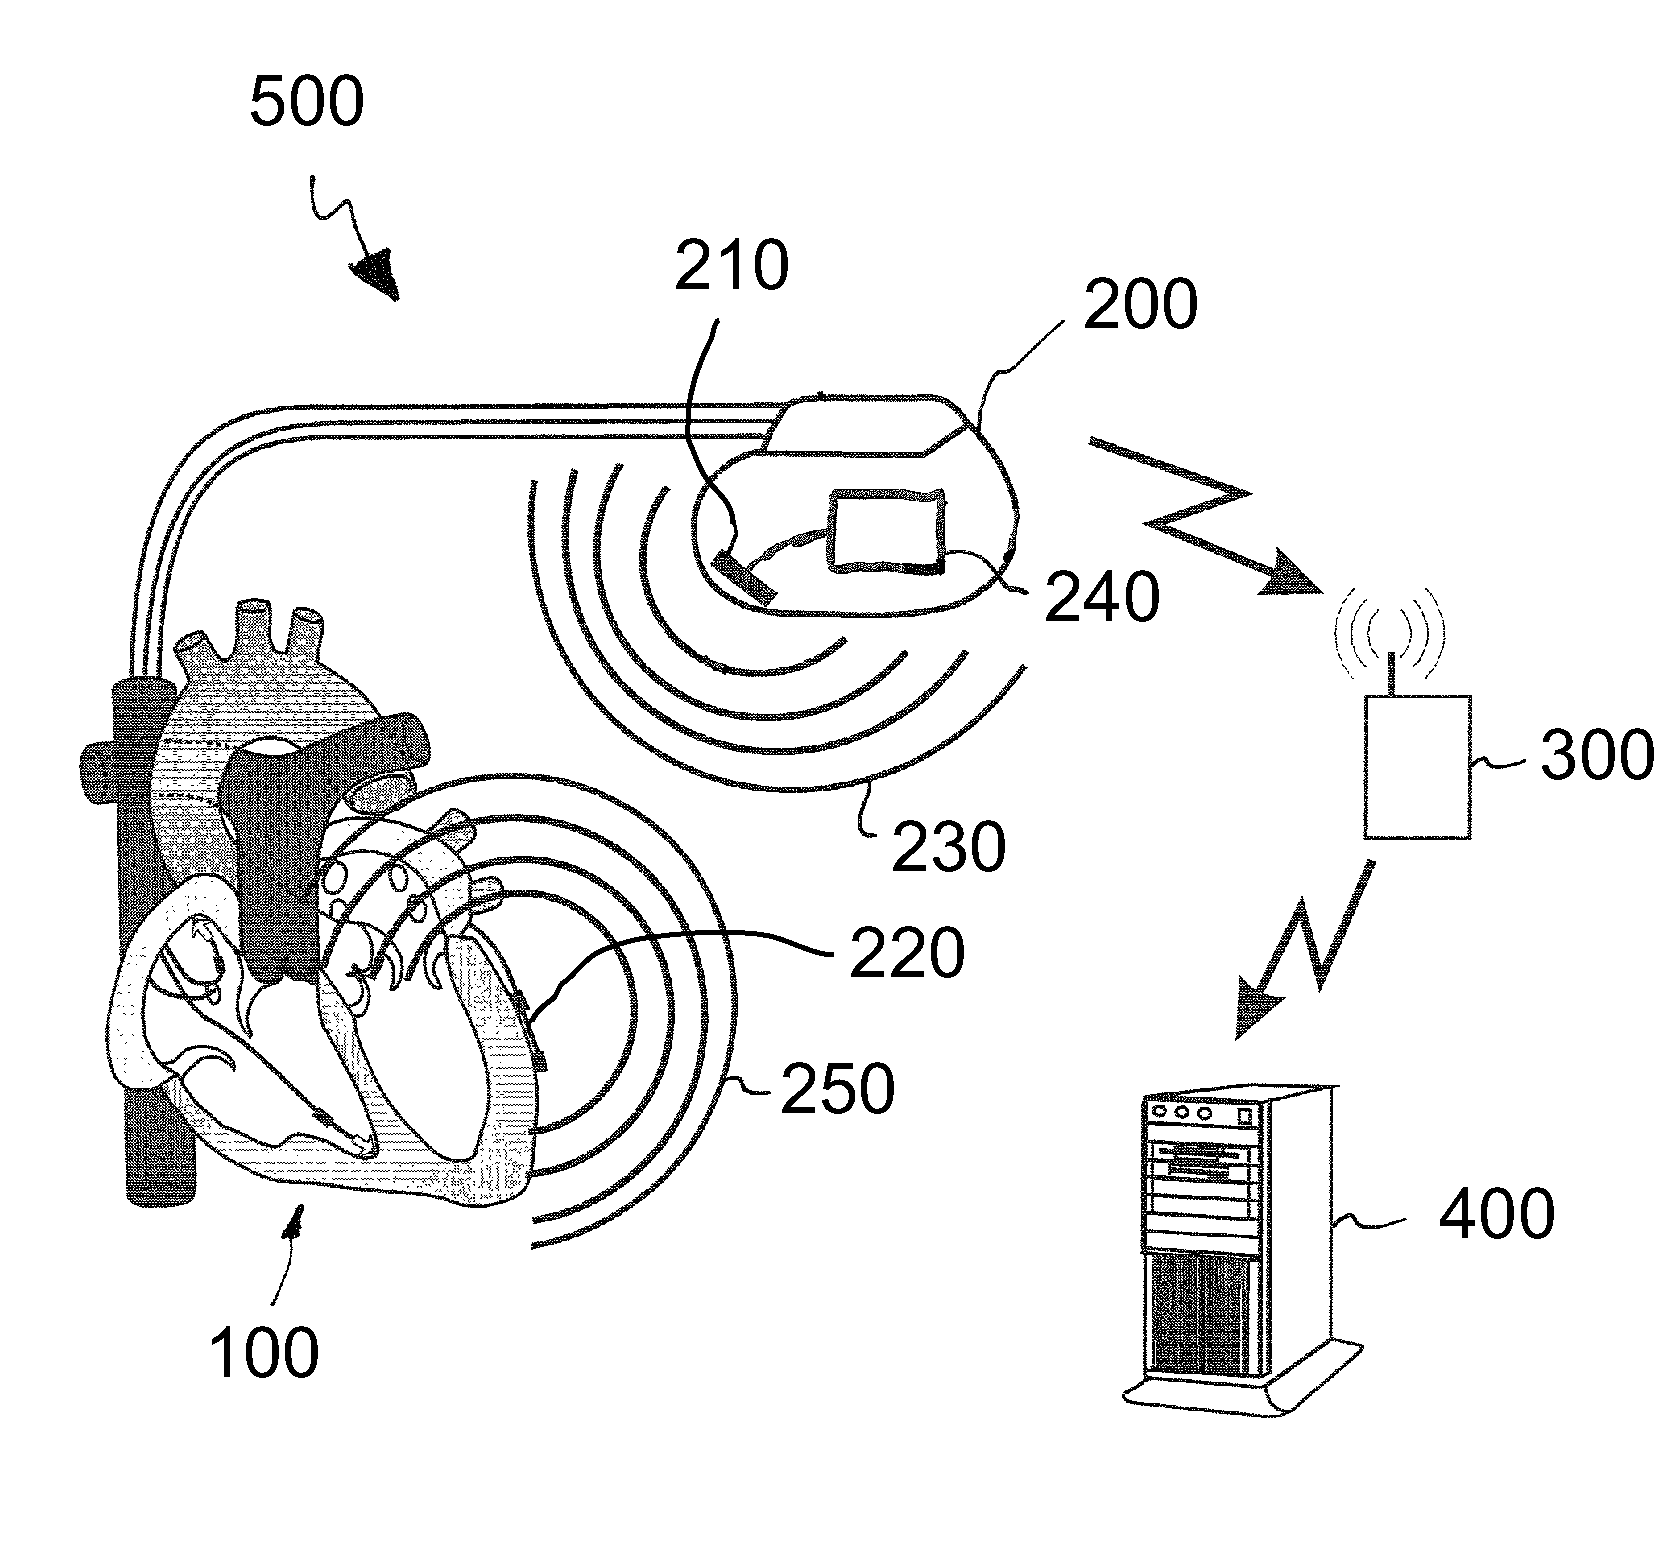 Implant and system for predicting decompensation